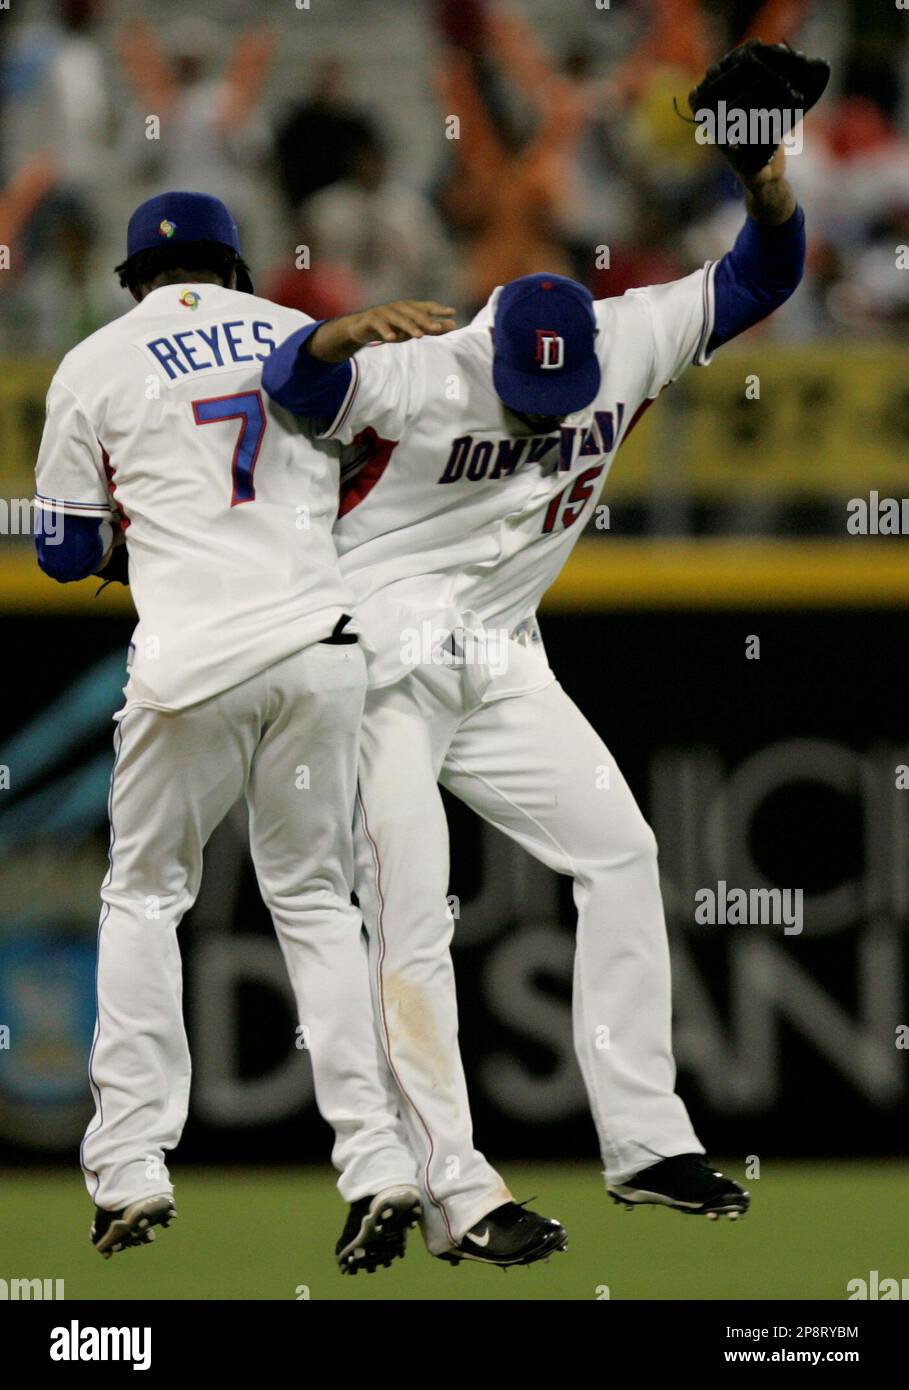 Dominican Republic's Jose Reyes, left, celebrates with teammate